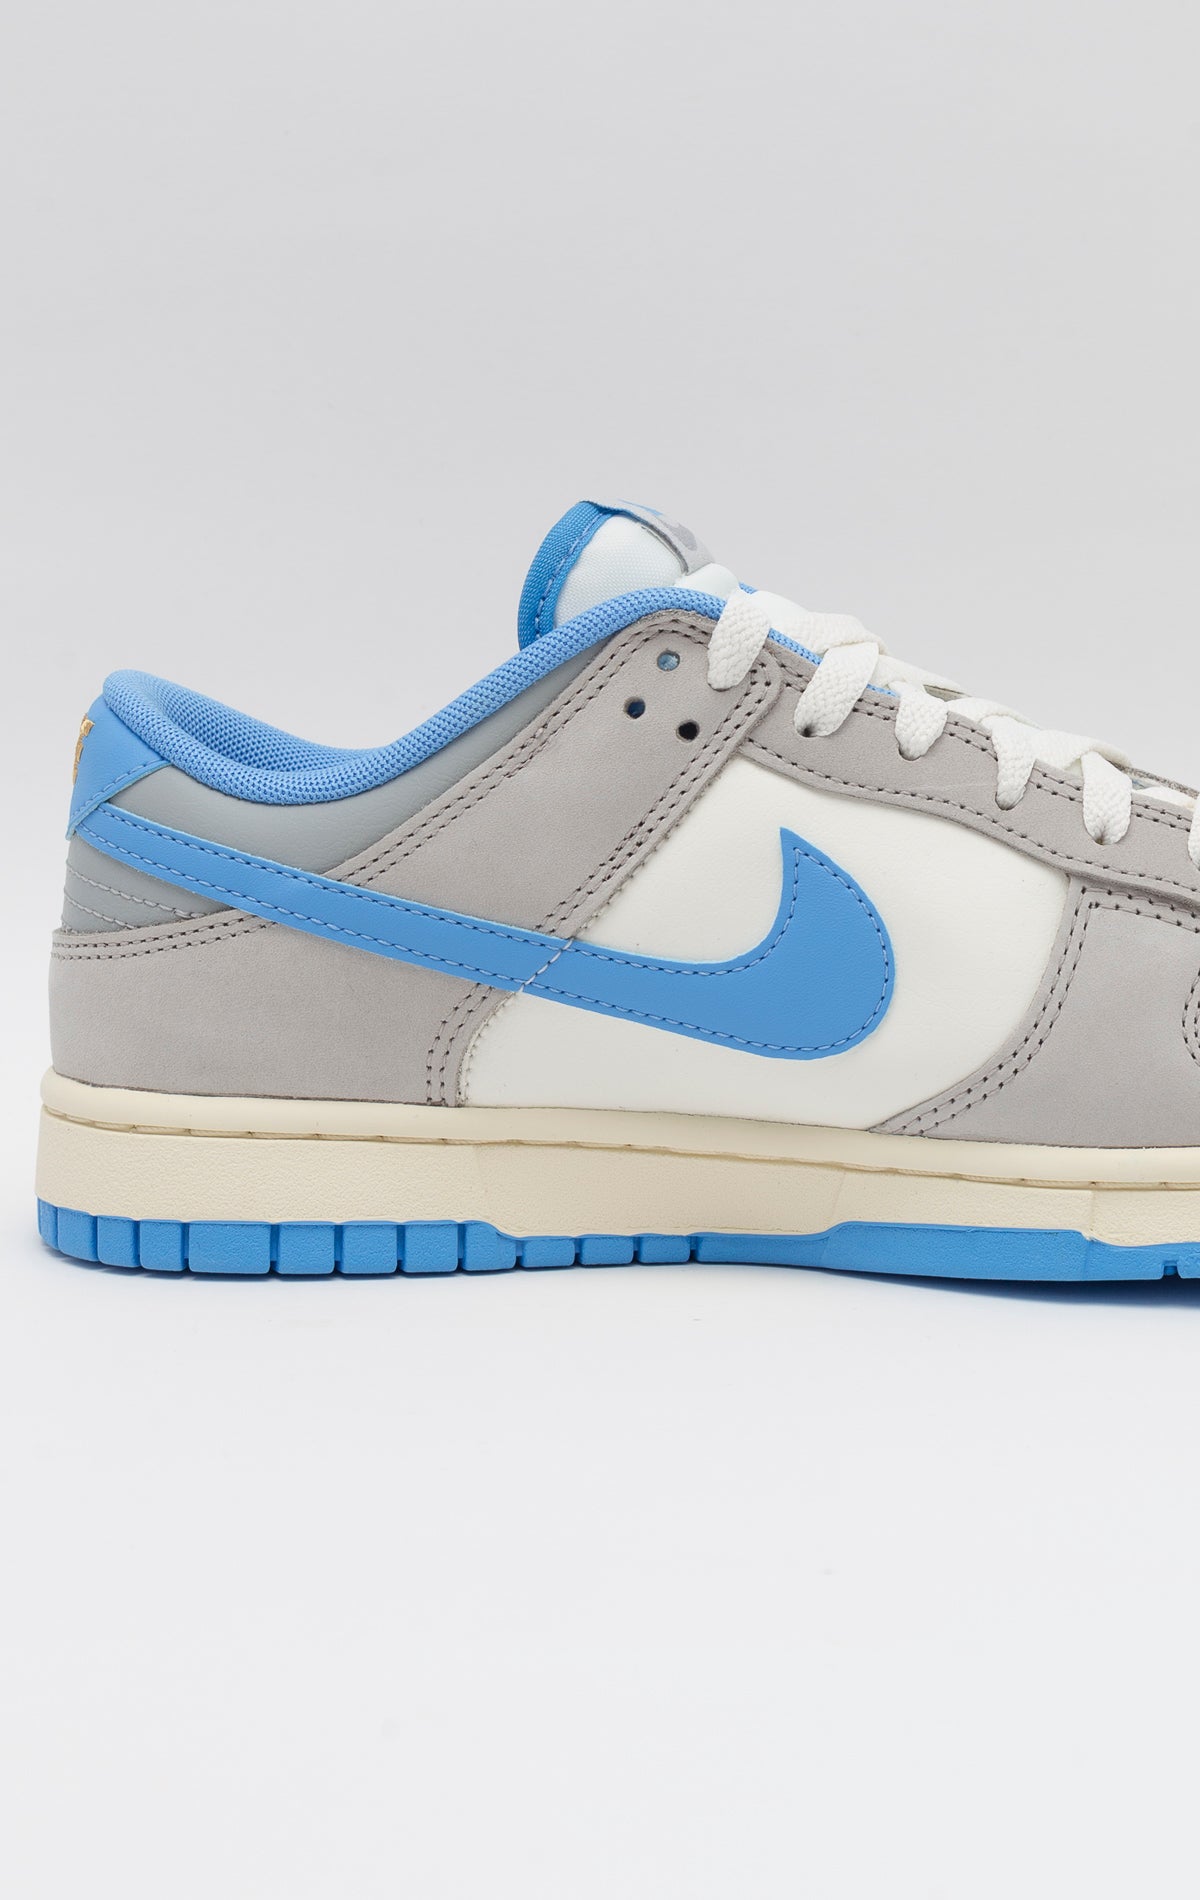 The Nike Dunk Low Athletic Department University Blue showcases a Light Smoke Gray upper with University Blue detailing. Made with high-quality leather and suede, it boasts both durability and fashion in a traditional low-top design. The padded collar, cushioned insole, and pivot point tread on the rubber outsole guarantee comfort. The Light Iron Ore EVA foam midsole offers impact defense. Iconic Swoosh logos can be found on both sides, and the tongue and heel tab feature Nike branding.